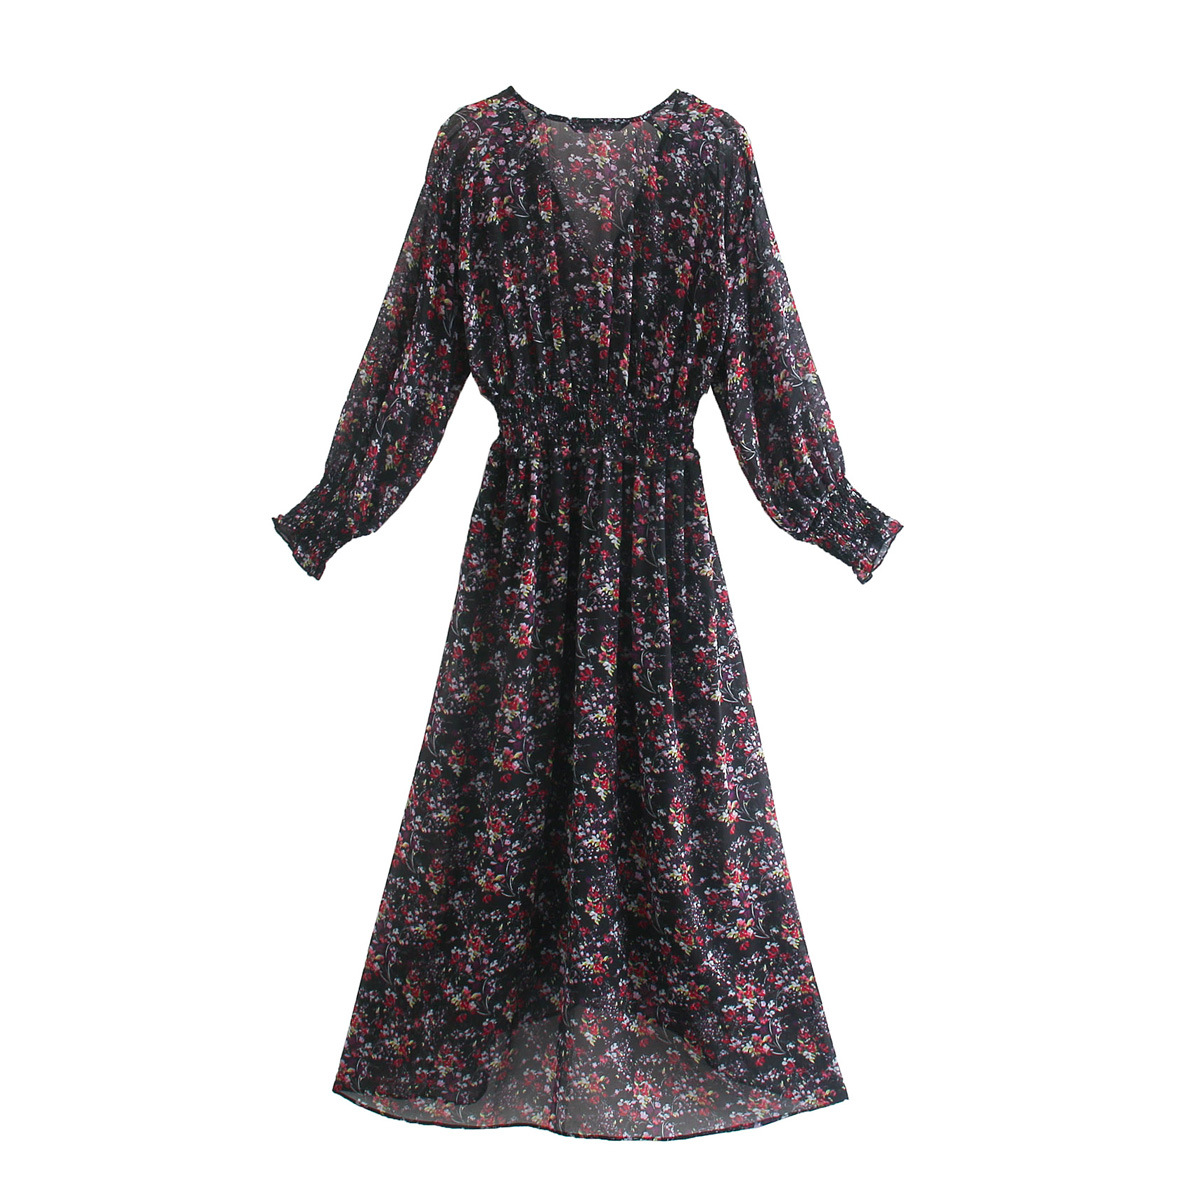 Autumn Print Long Dress With V-neck And Long Sleeves